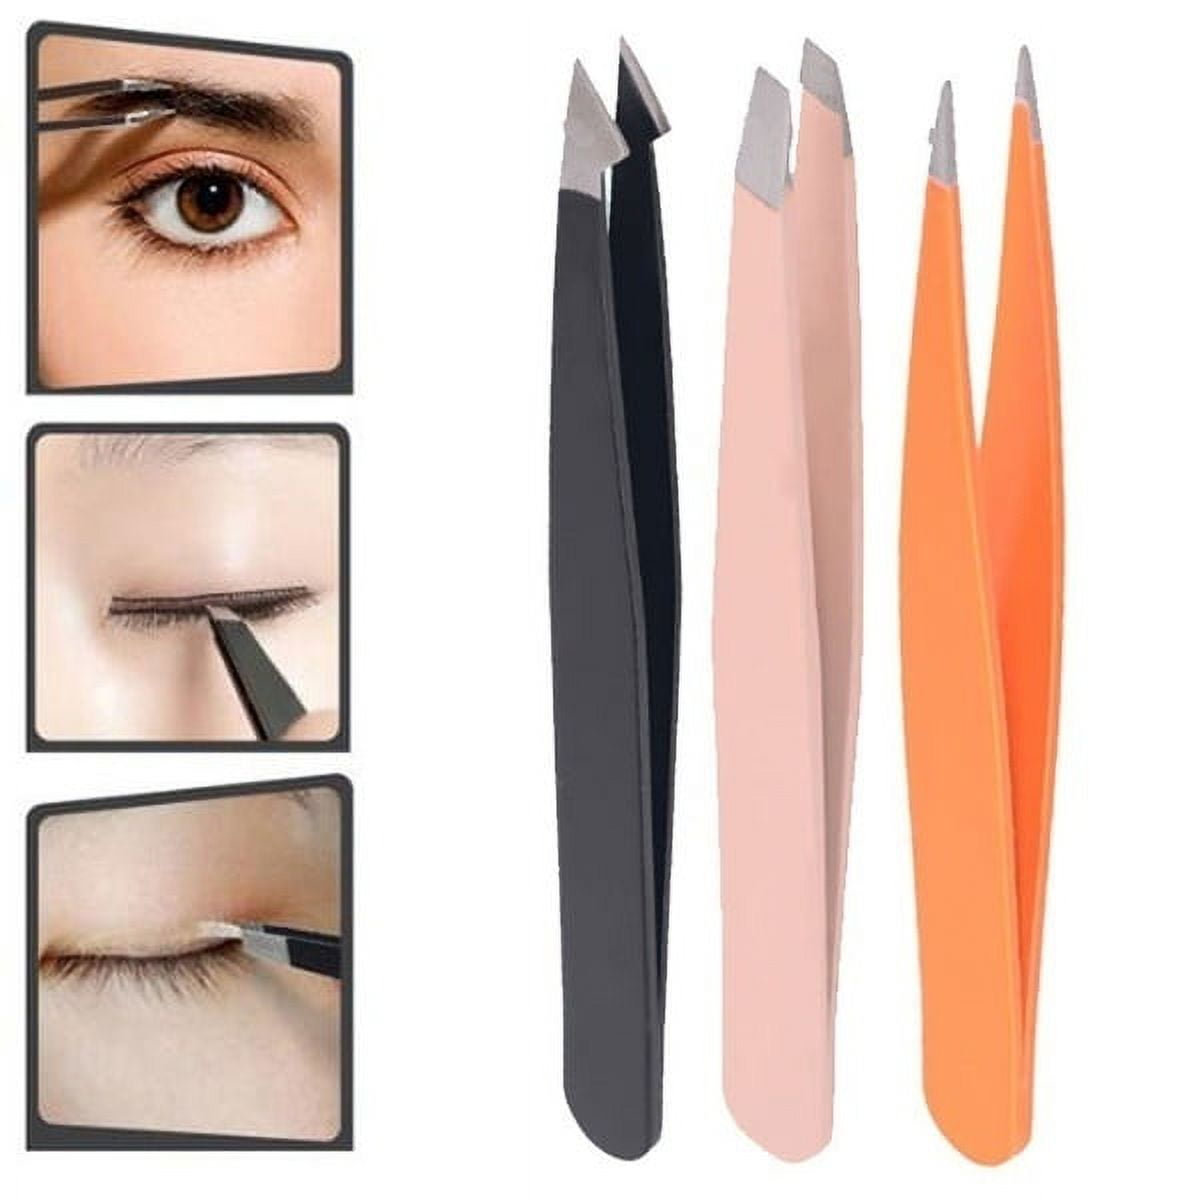 Raox 3pcs Point Slant Knife Tip Eyebrow Removal Tweezers Eyelashes Extension Tools, As The Pictures